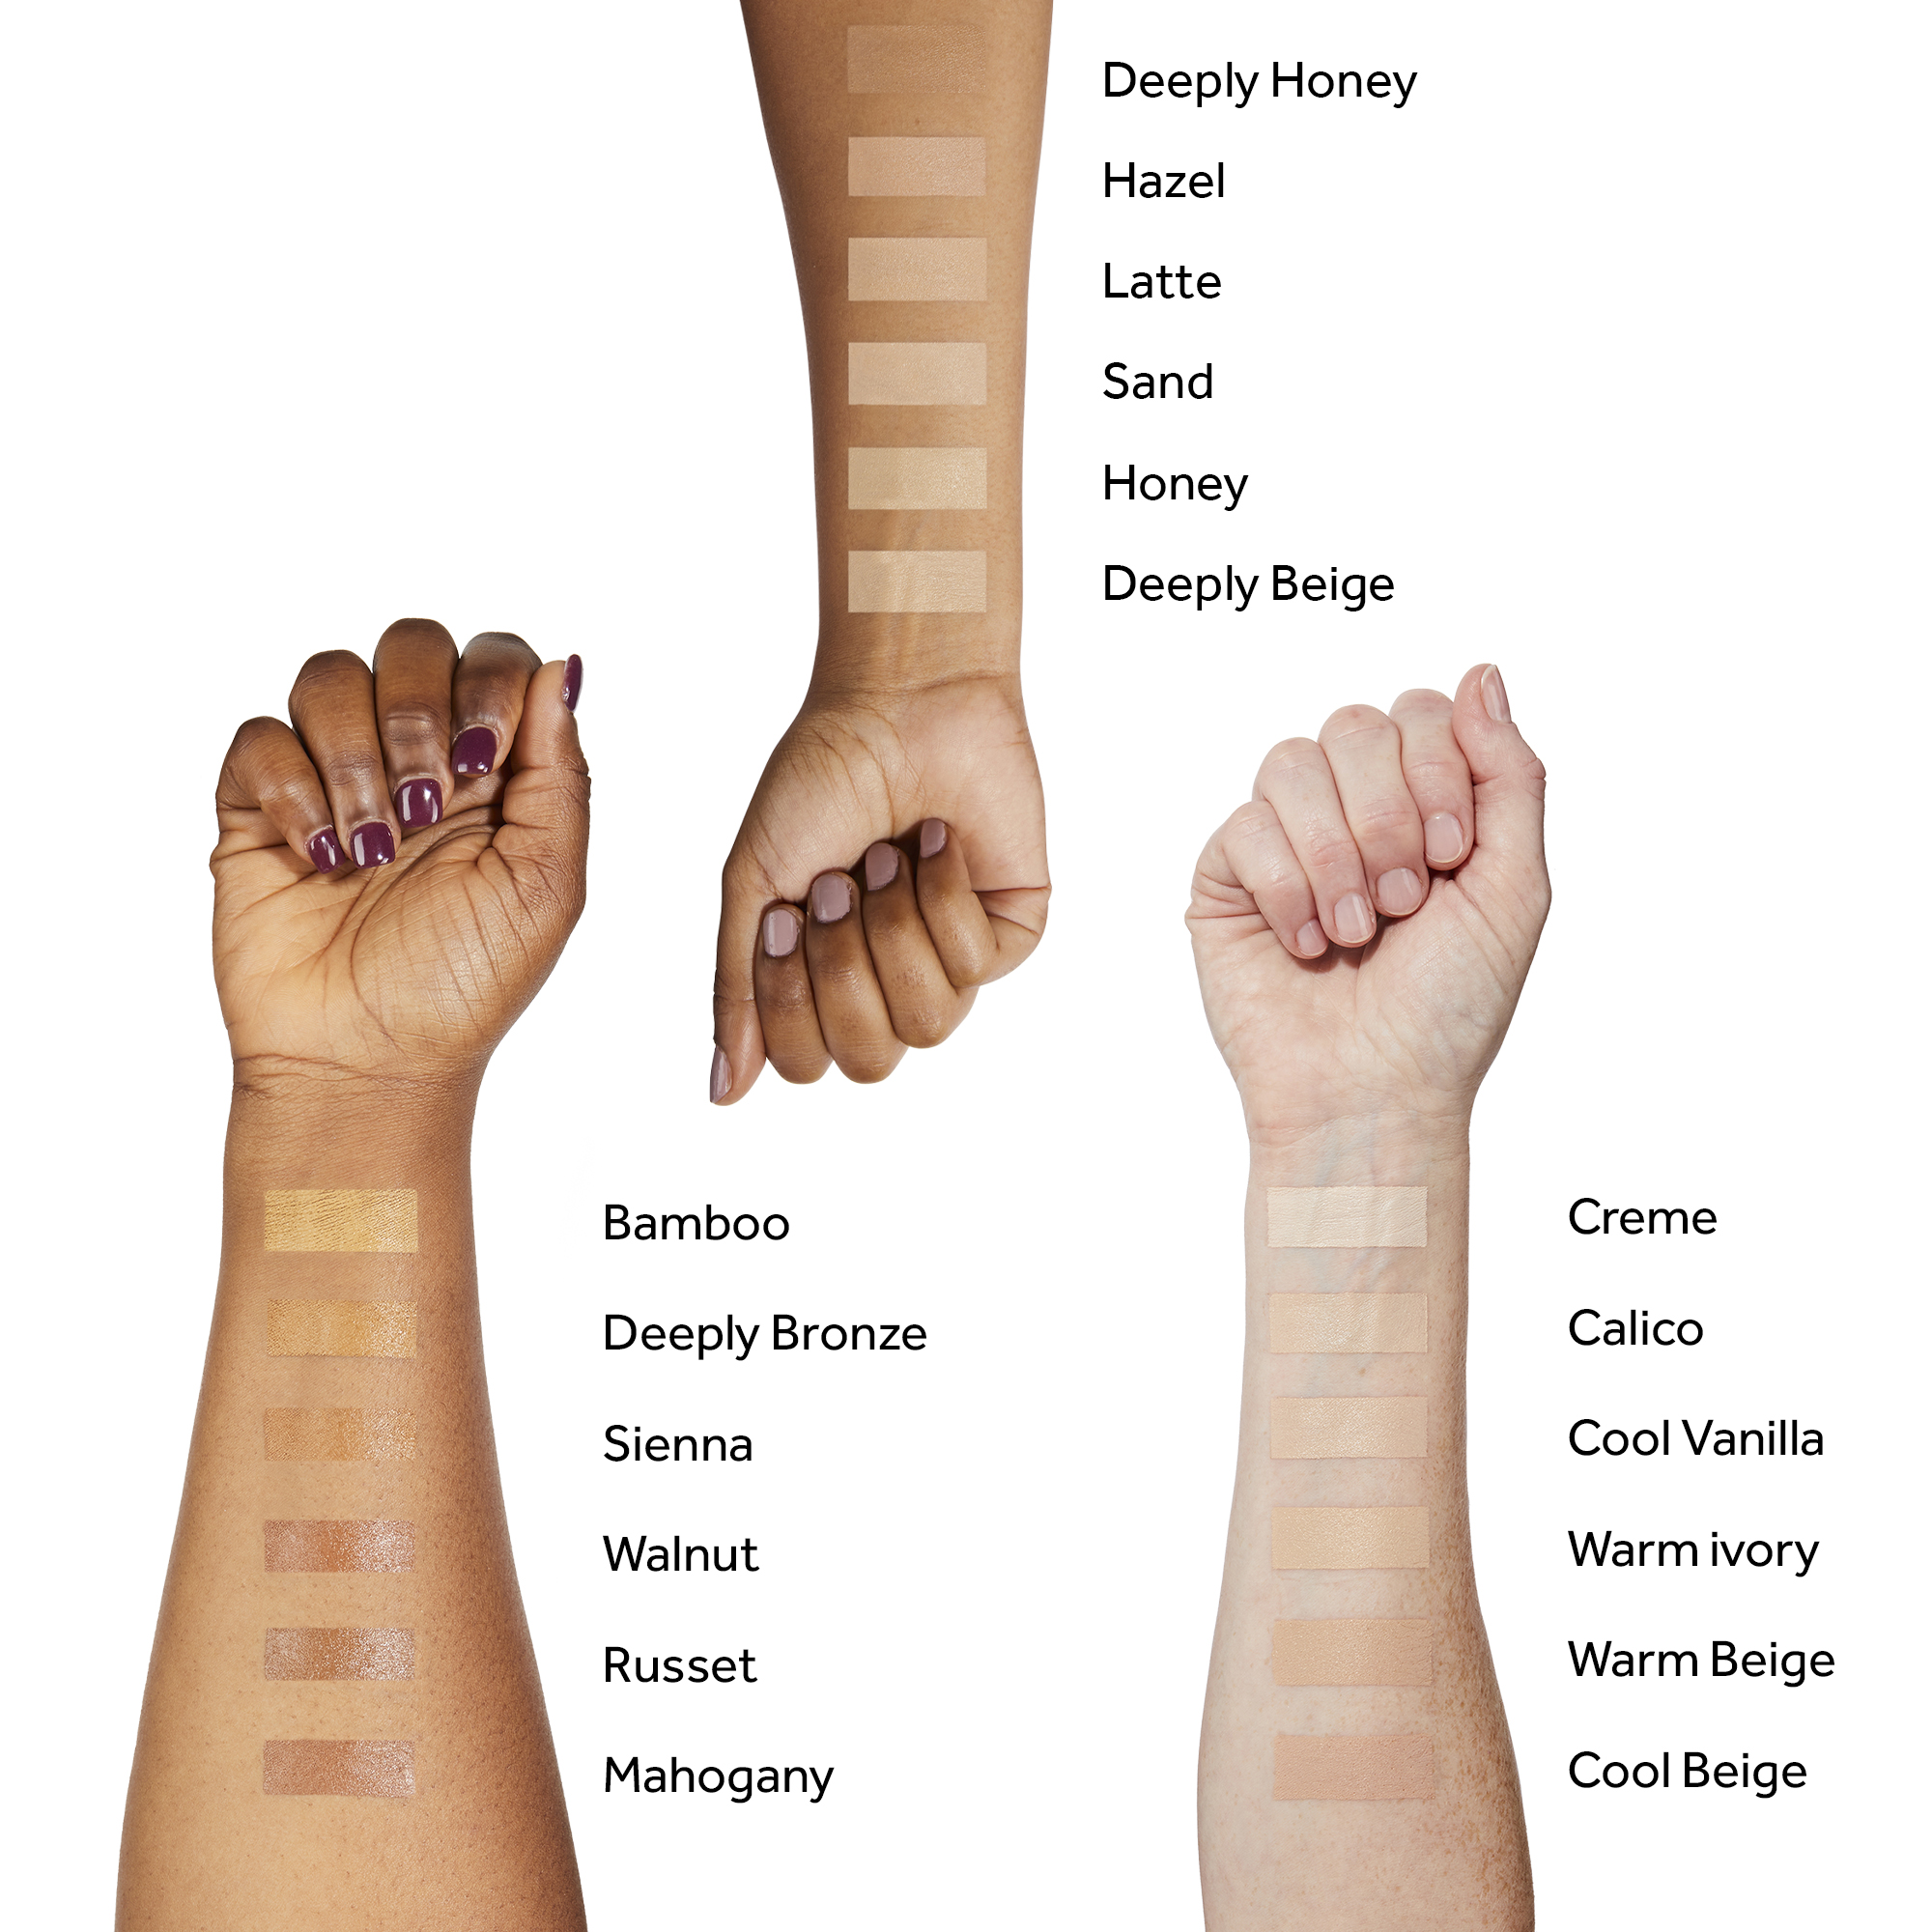 Deeply Honey, Hazel, Latte, Sand, Honey, Deeply Beige, Bamboo, Deeply Bronze, Sienna, Walnut, Russet, Mahogany, Creme, Calico, Cool Vanilla, Warm Ivory, Warm Beige, Cool Beige. The image shows various shades on different skin tones